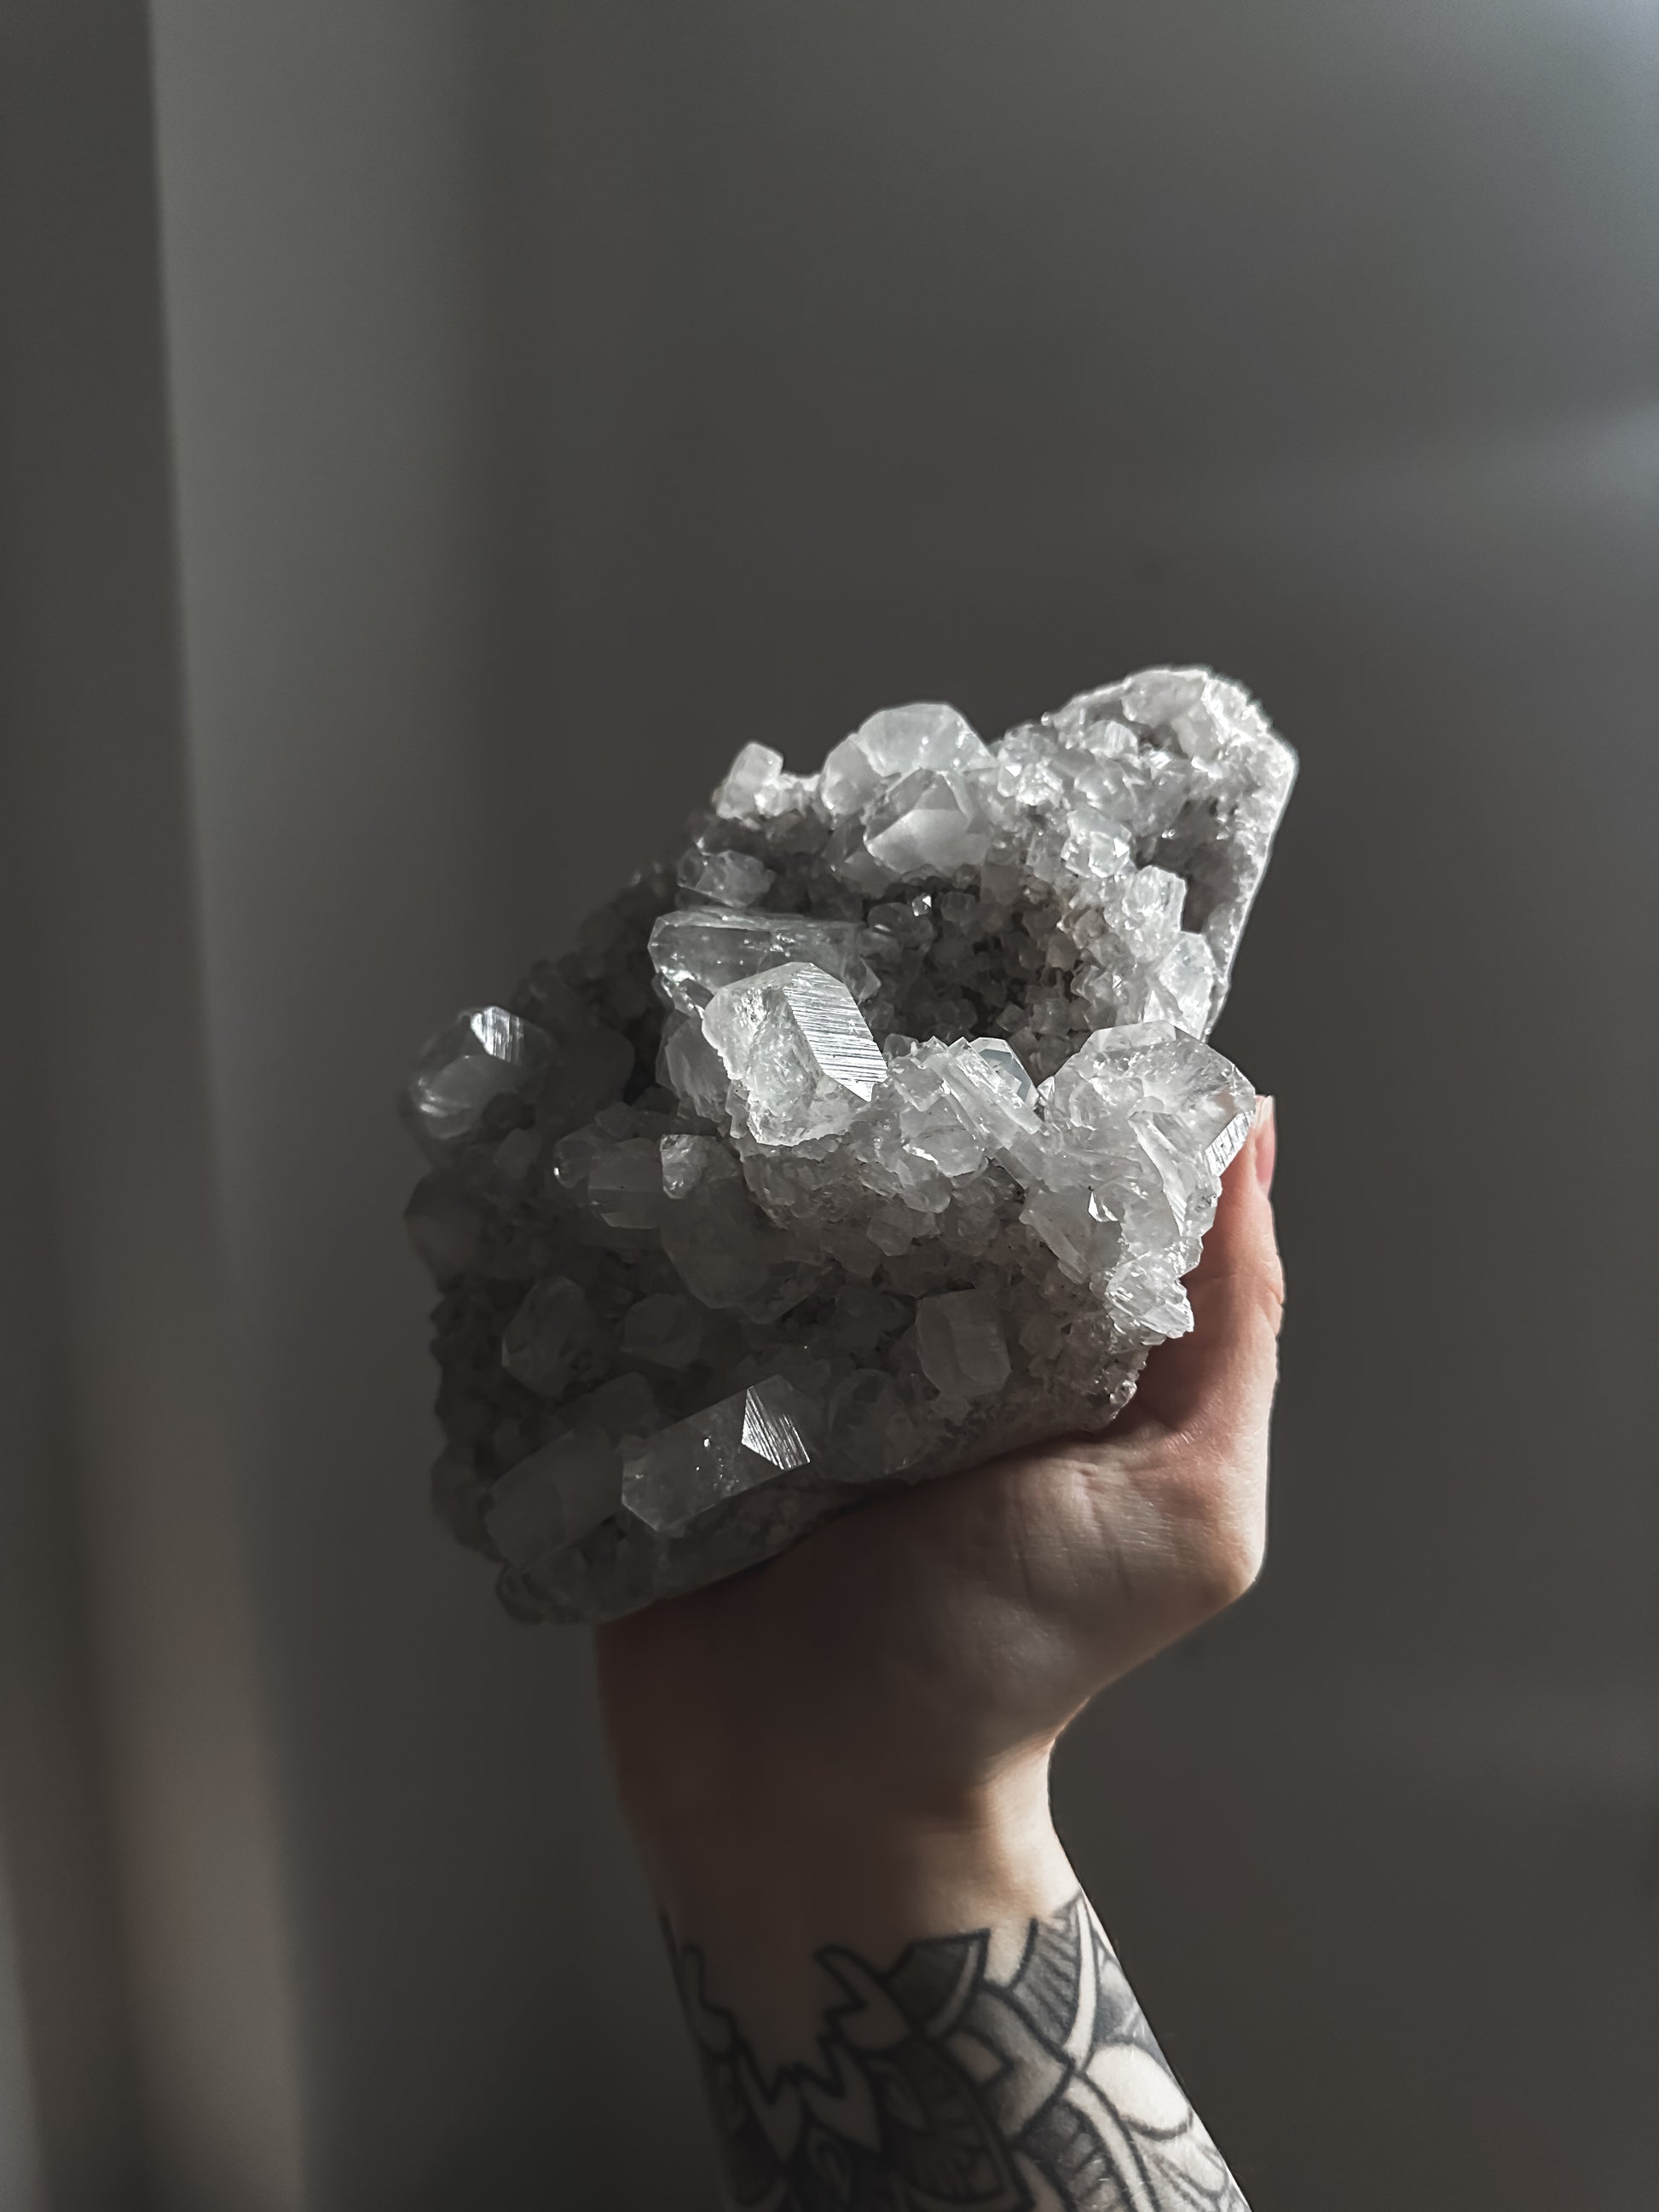 A Large Apophyllite Cluster, featuring sparkling, translucent crystals arranged in a mesmerizing formation. Perfect for adding natural elegance to any home decor or presenting as a thoughtful metaphysical gift.